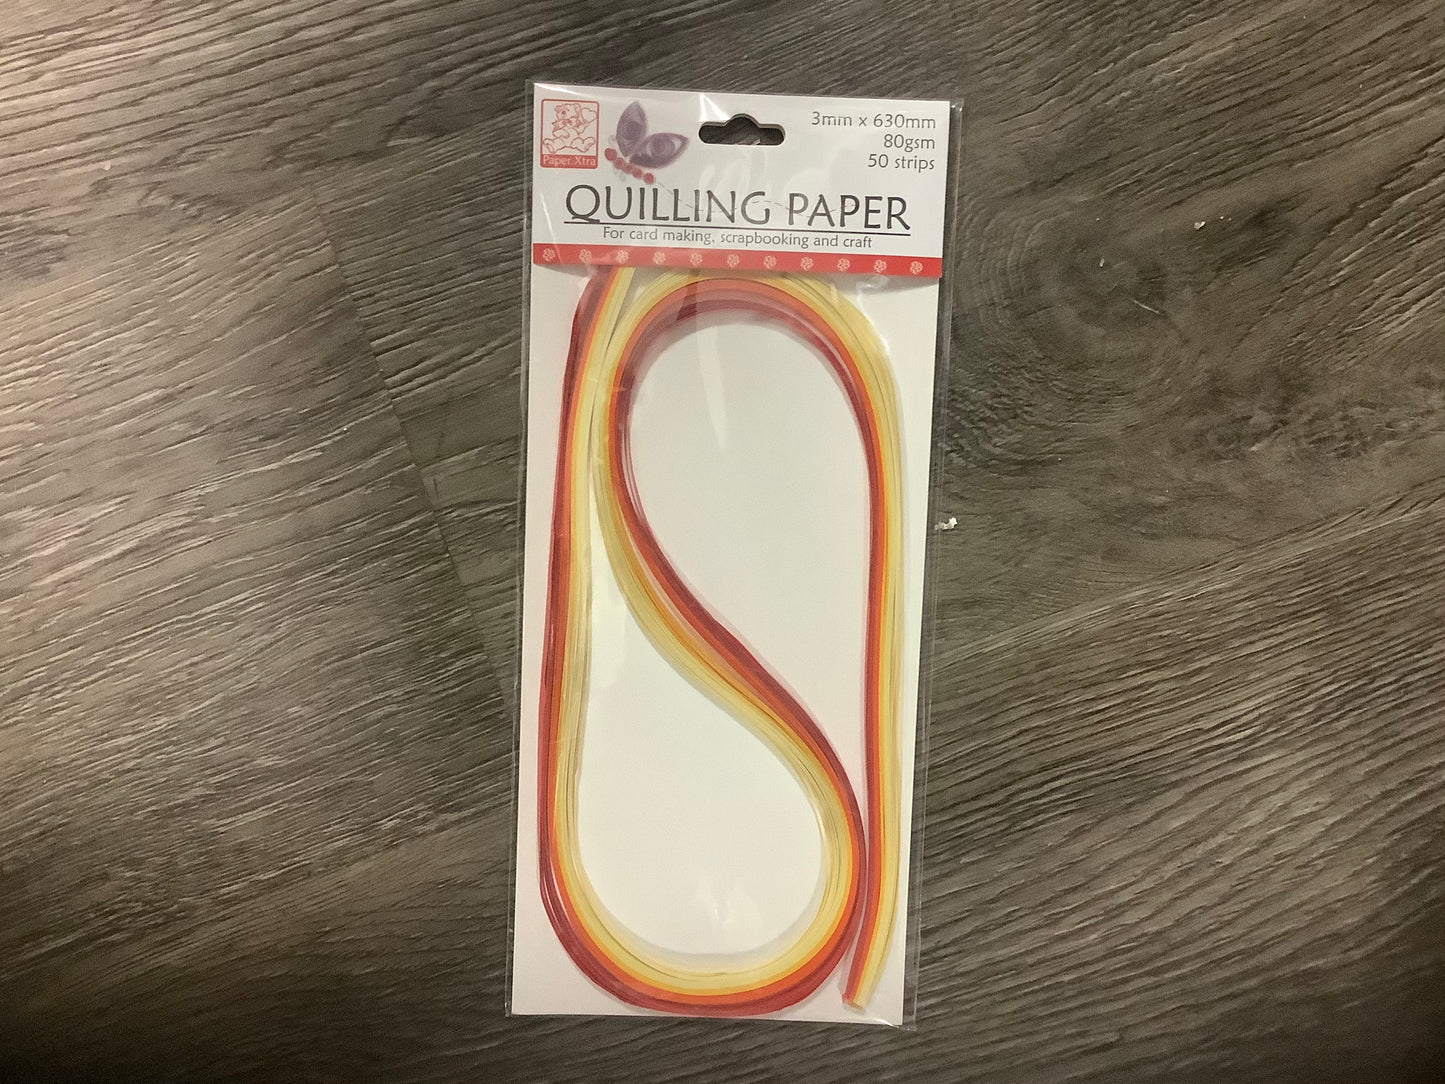 Quilling Paper - 50 Strip pack